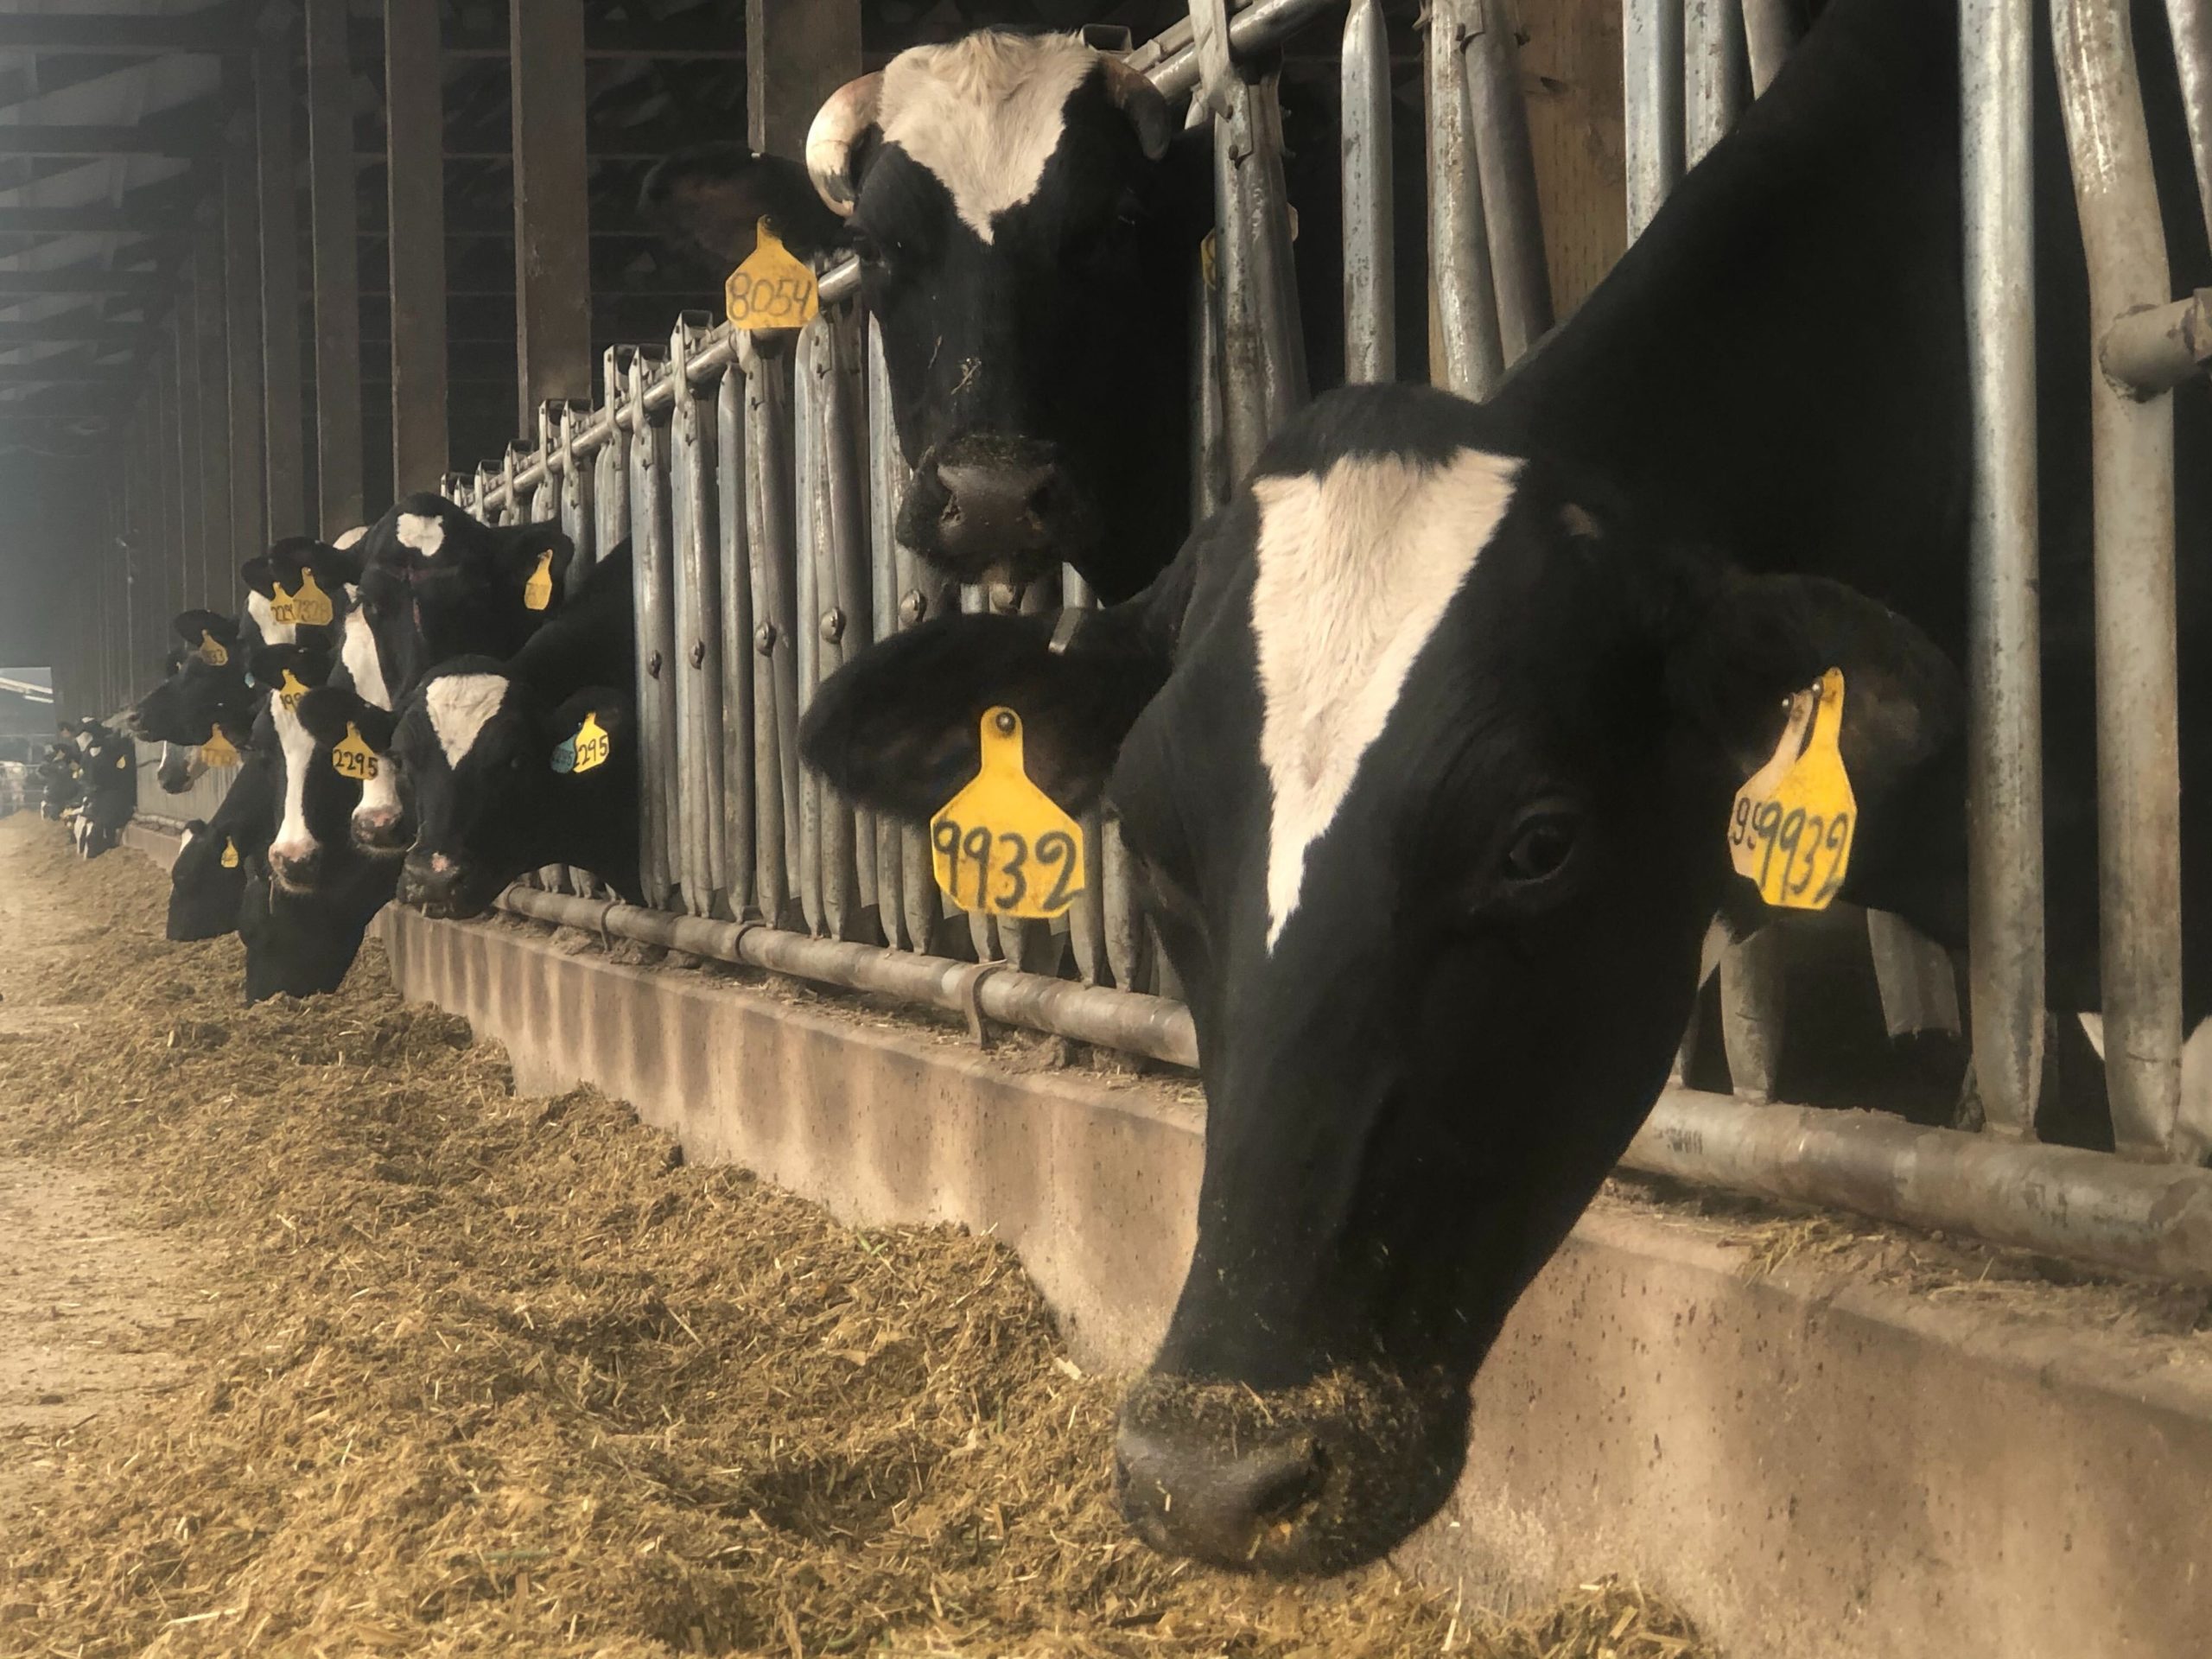 With widespread wildfires across the Northwest, dairy farmers have to make the difficult decision to move hundreds of cattle to safer ground or stay put.